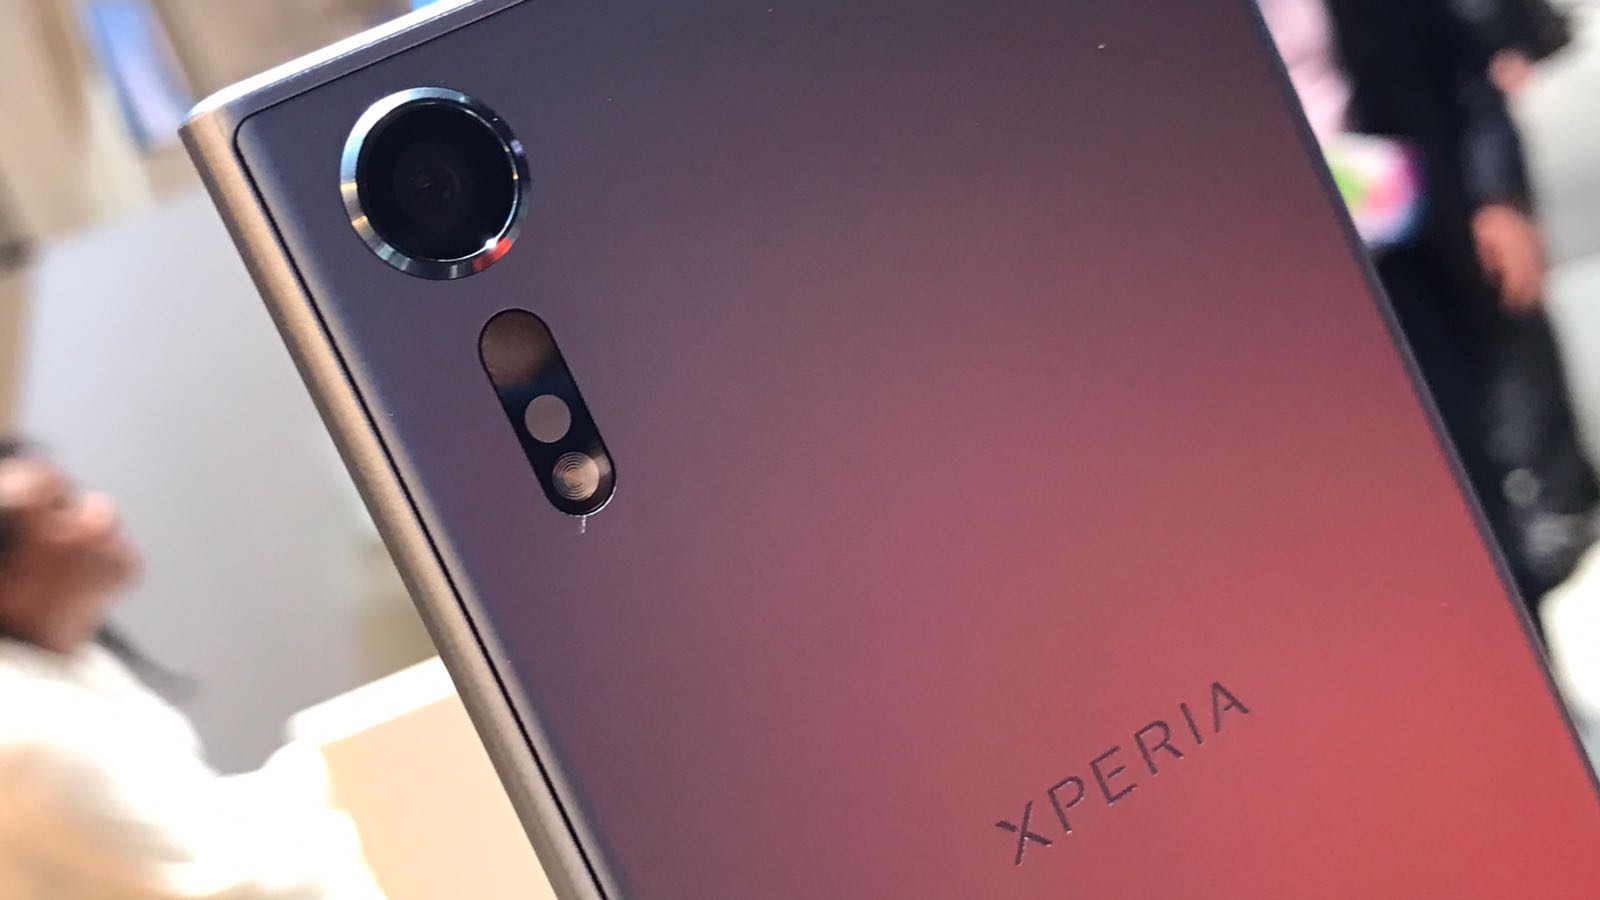 Sony Xperia XZs in Pictures